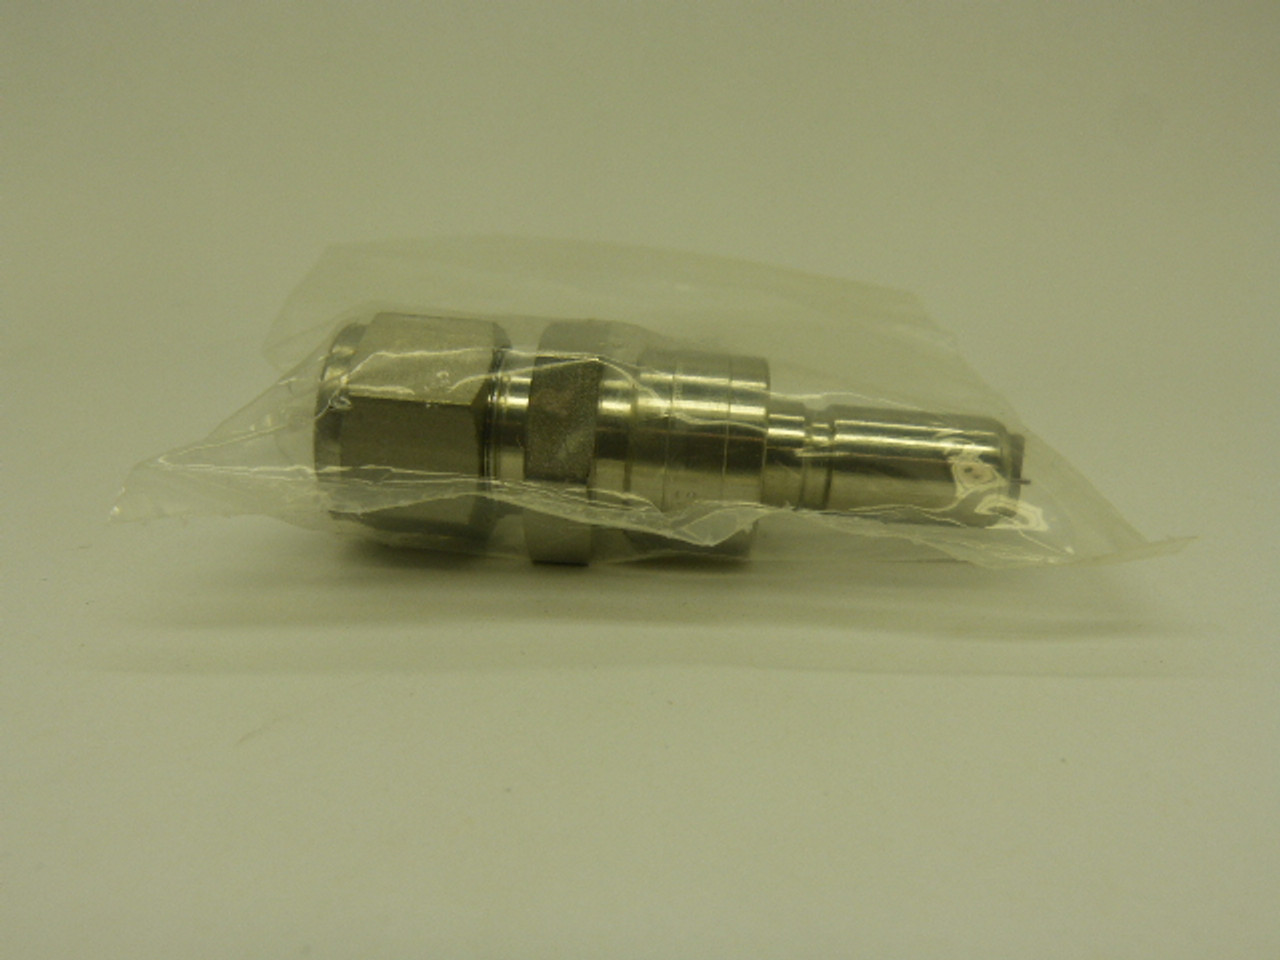 Swagelok SS-QC8-S-810 Quick Connect 1/2" Tube Fitting NWB